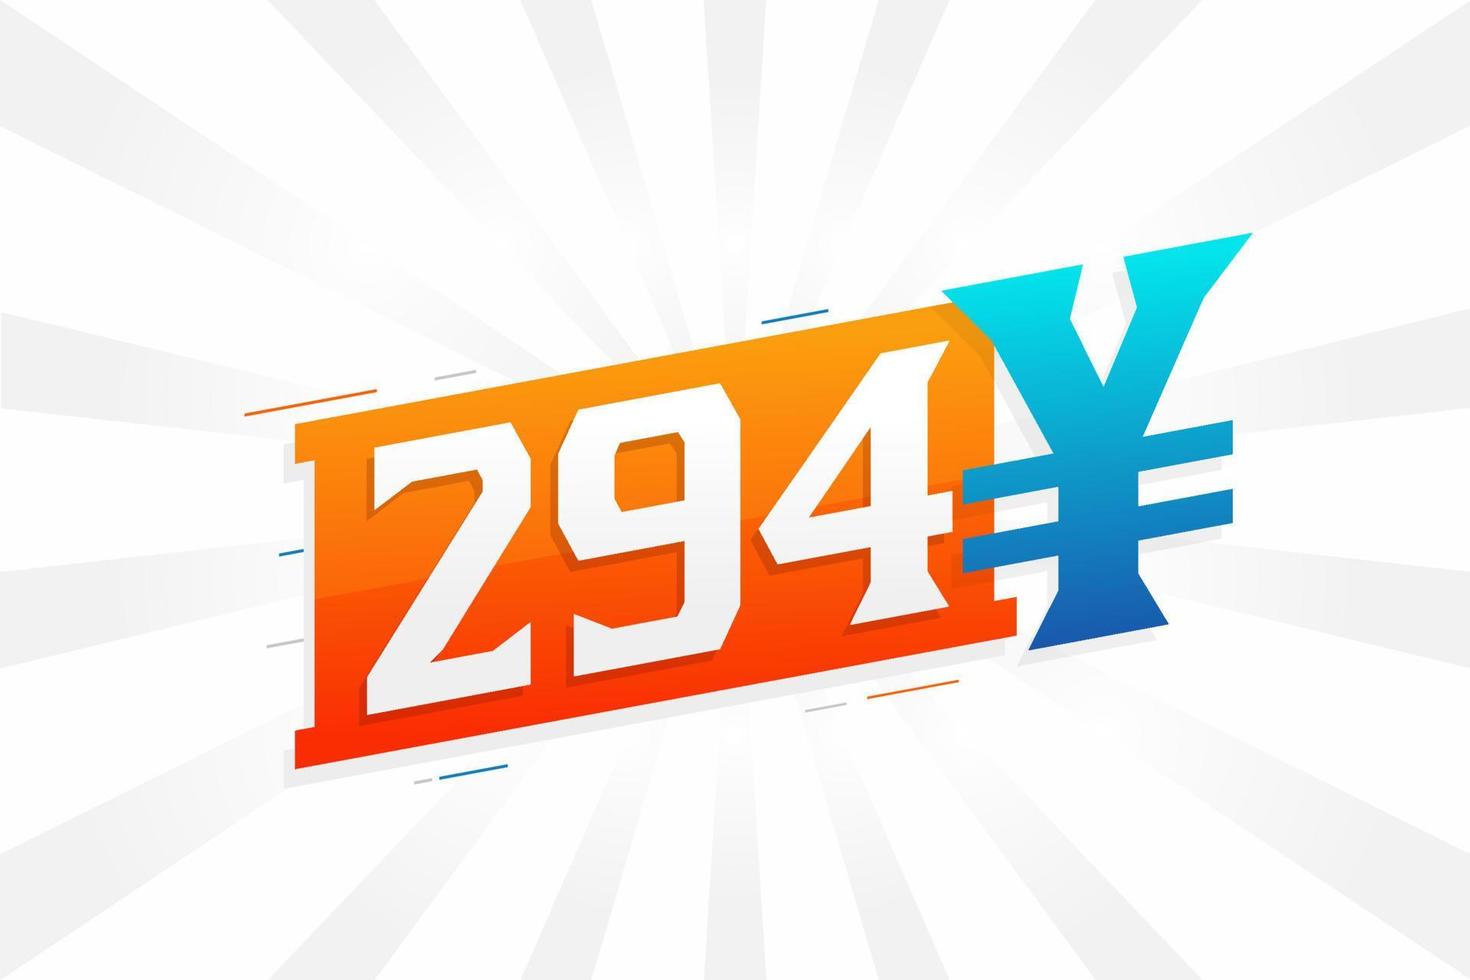 294 Yuan Chinese currency vector text symbol. 294 Yen Japanese currency Money stock vector